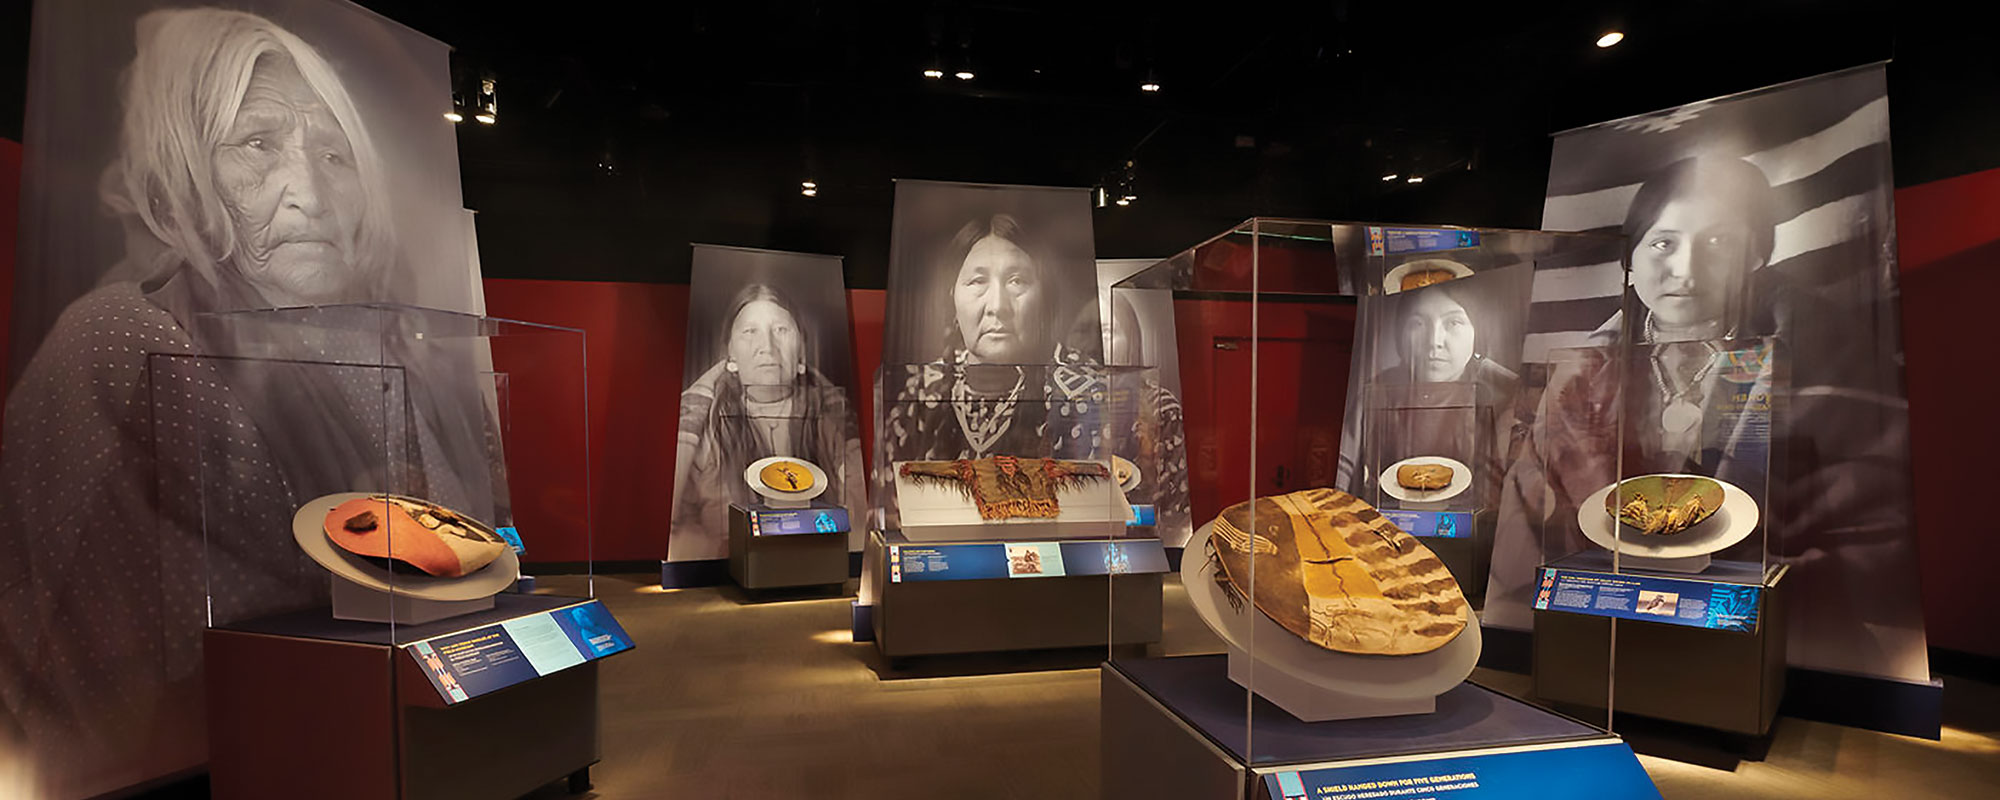 An installation view of an exhibition of war shields with large black and white photos of Native American women behind them